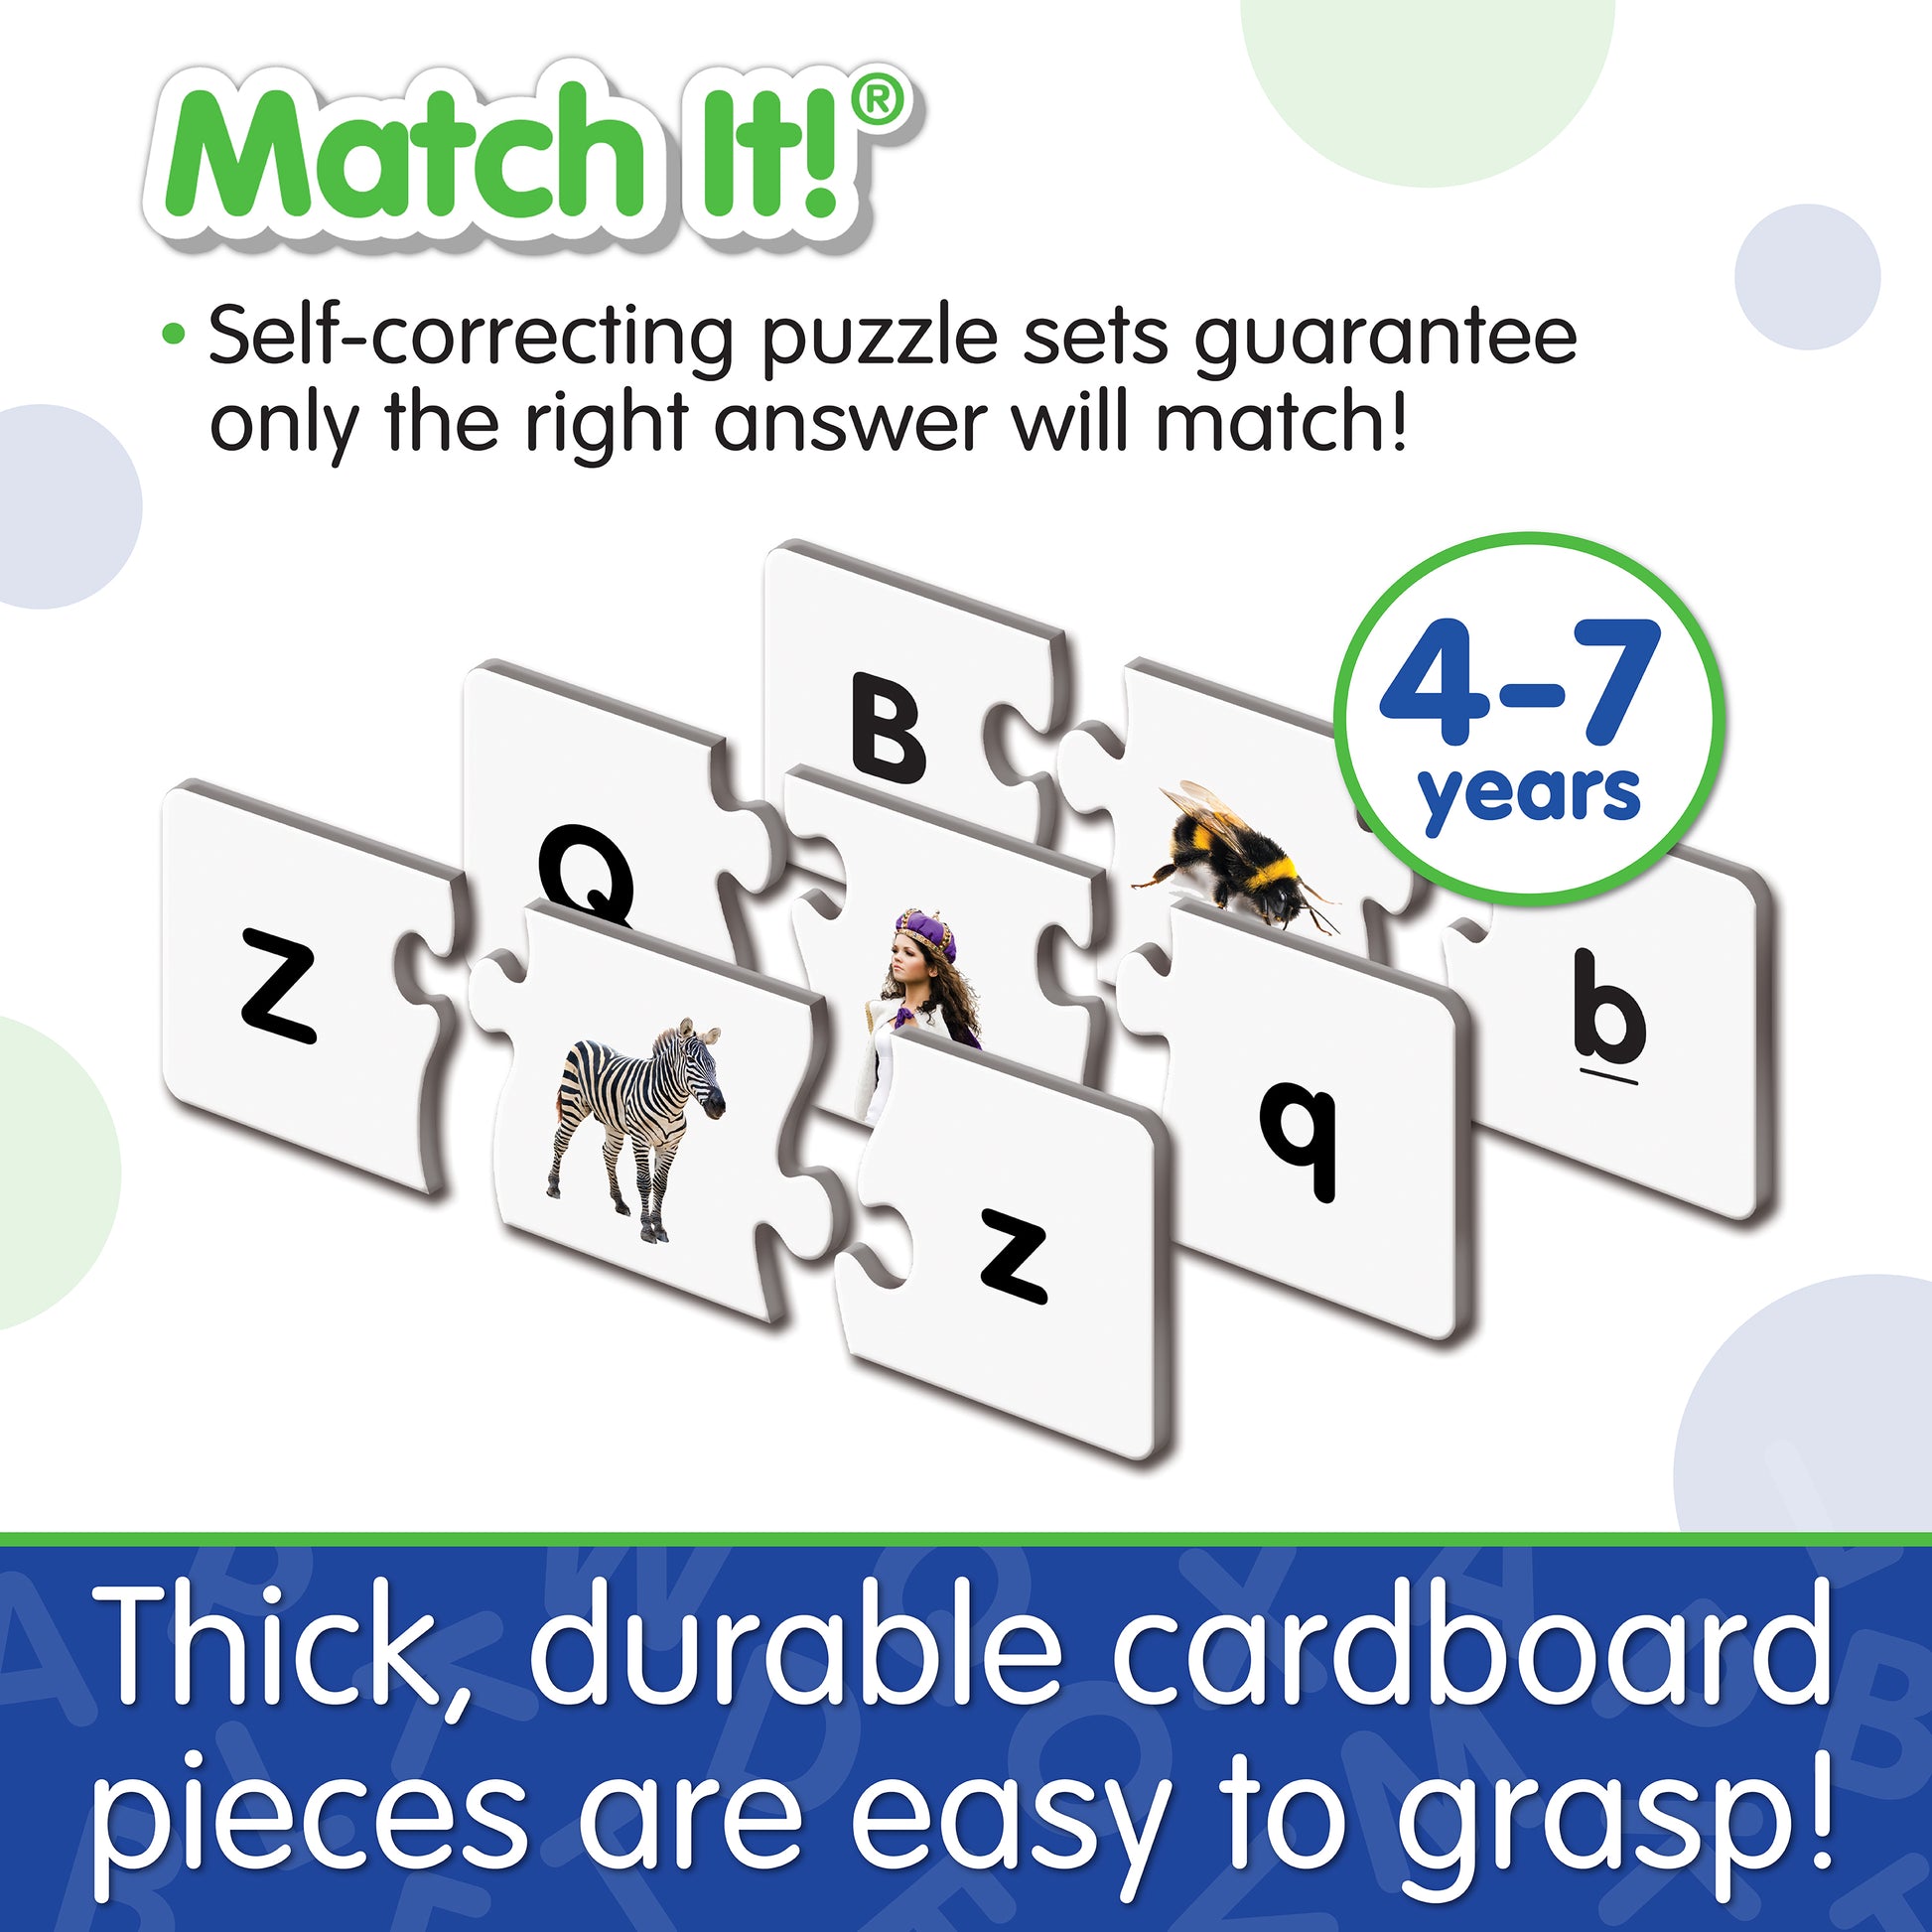 Infographic about Match It - Upper and Lower Case Letters' features that says, "Thick, durable cardboard pieces are easy to grasp!"